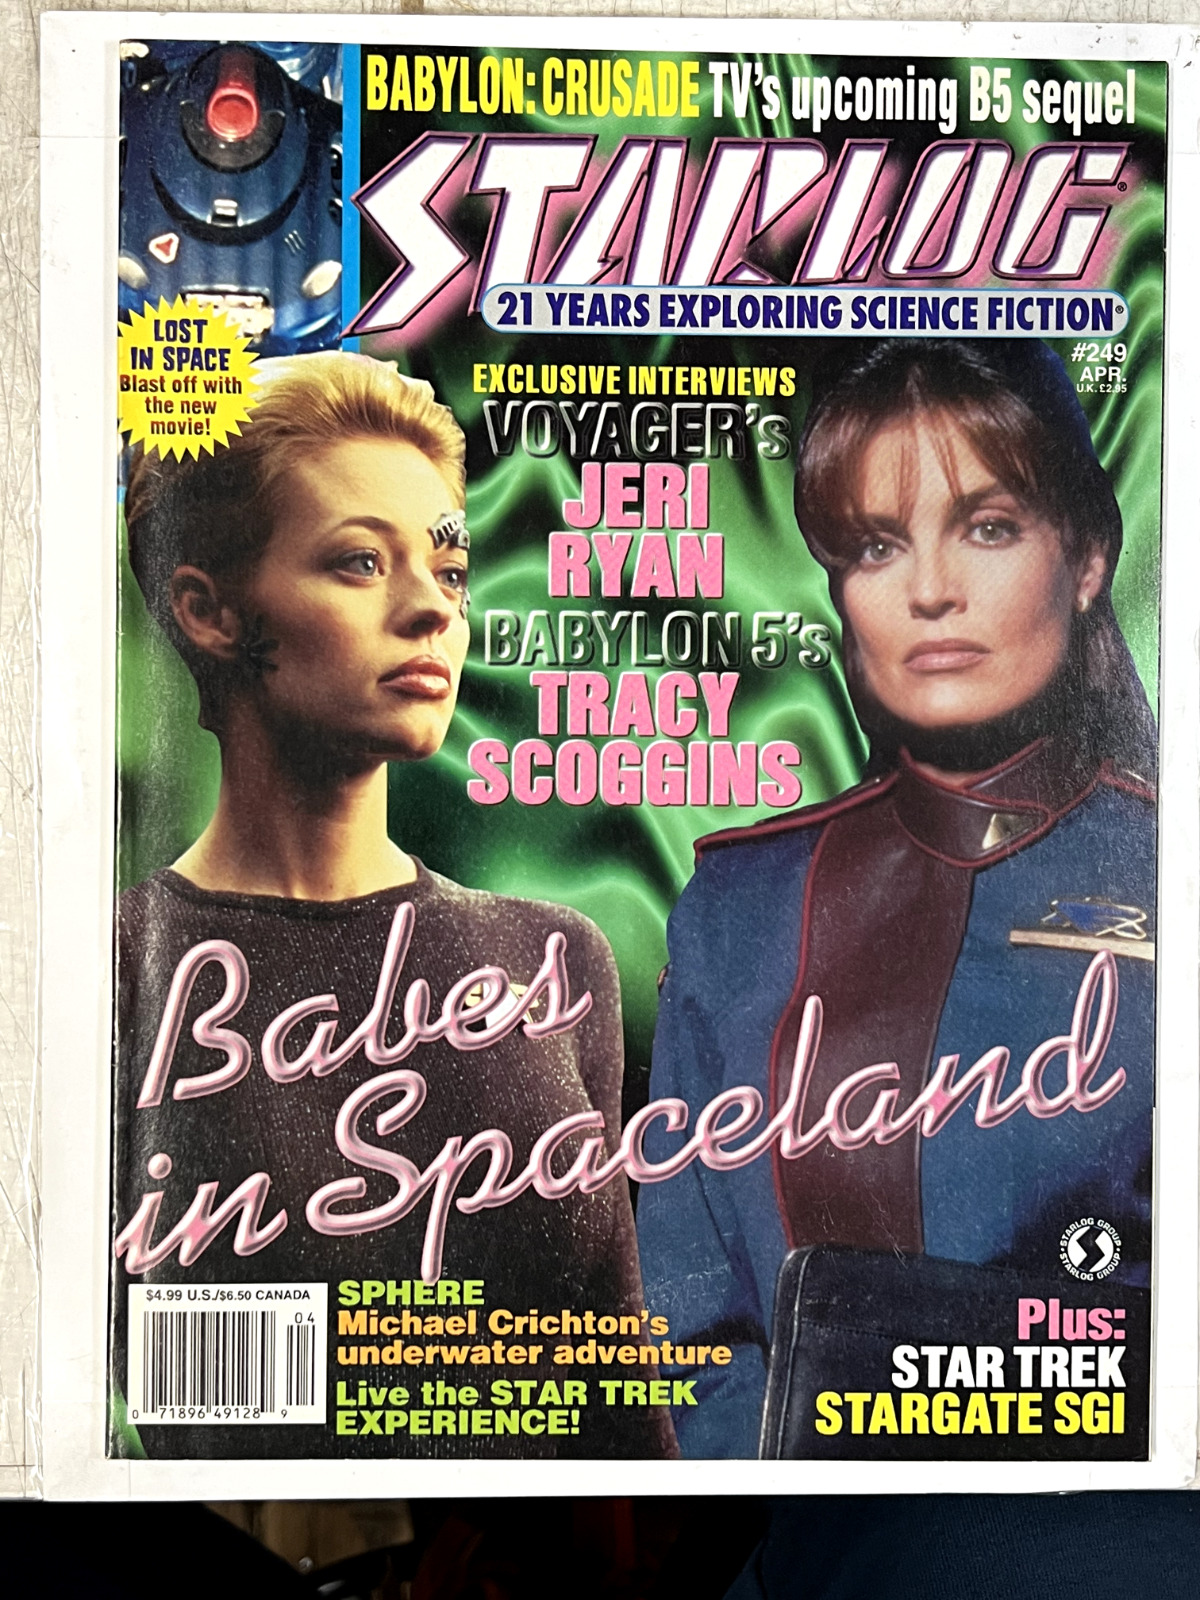 Starlog Magazine No. 249 April 1998 Babes in Spaceland | Combined Shipping B&B